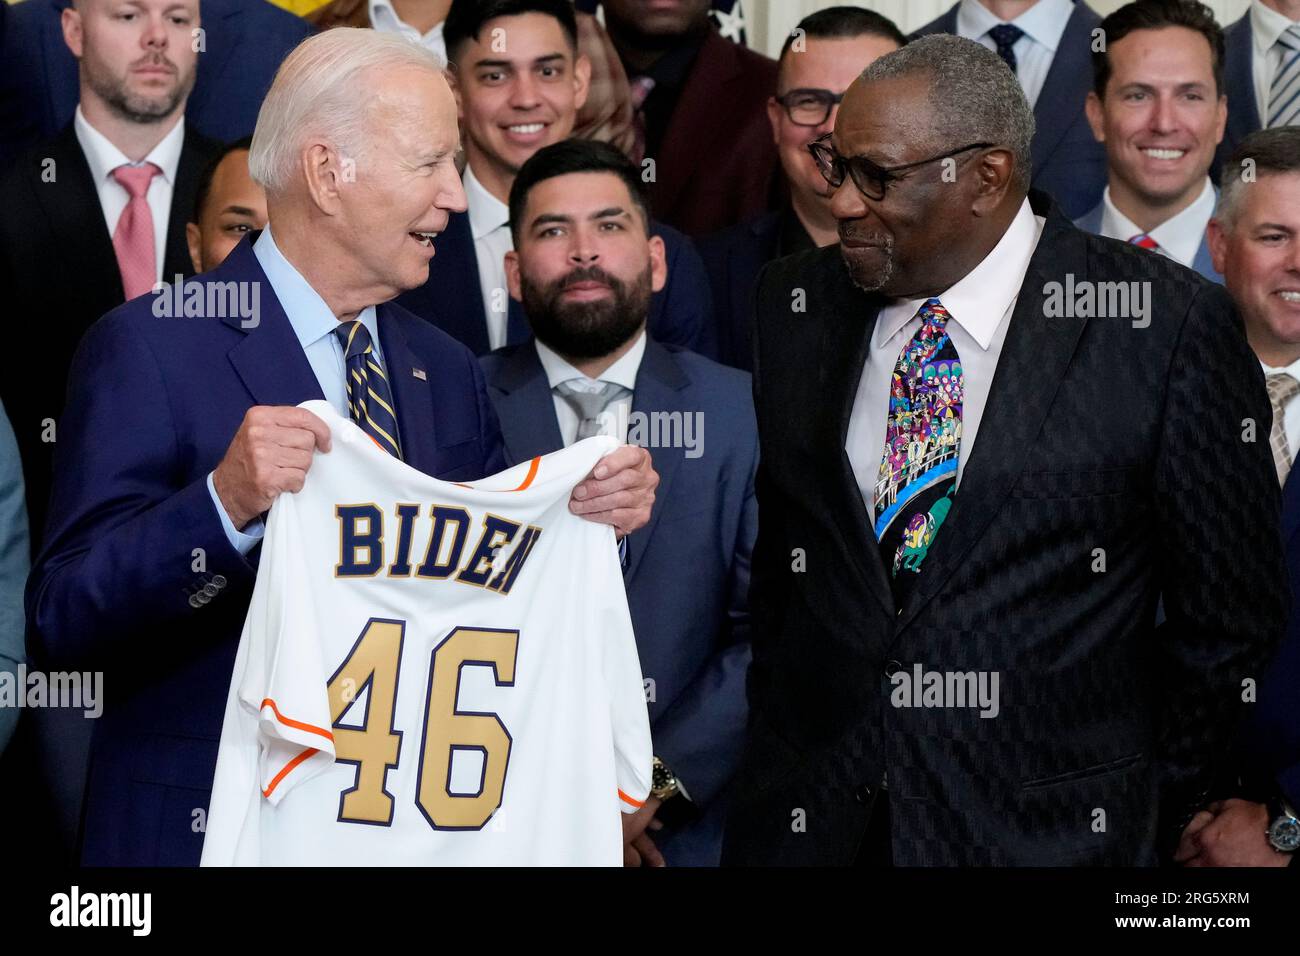 Houston Astros manager Dusty Baker Jr., right, presents a jersey to  President Joe Biden during an event celebrating the 2022 World Series  champion Houston Astros baseball team, in the East Room of